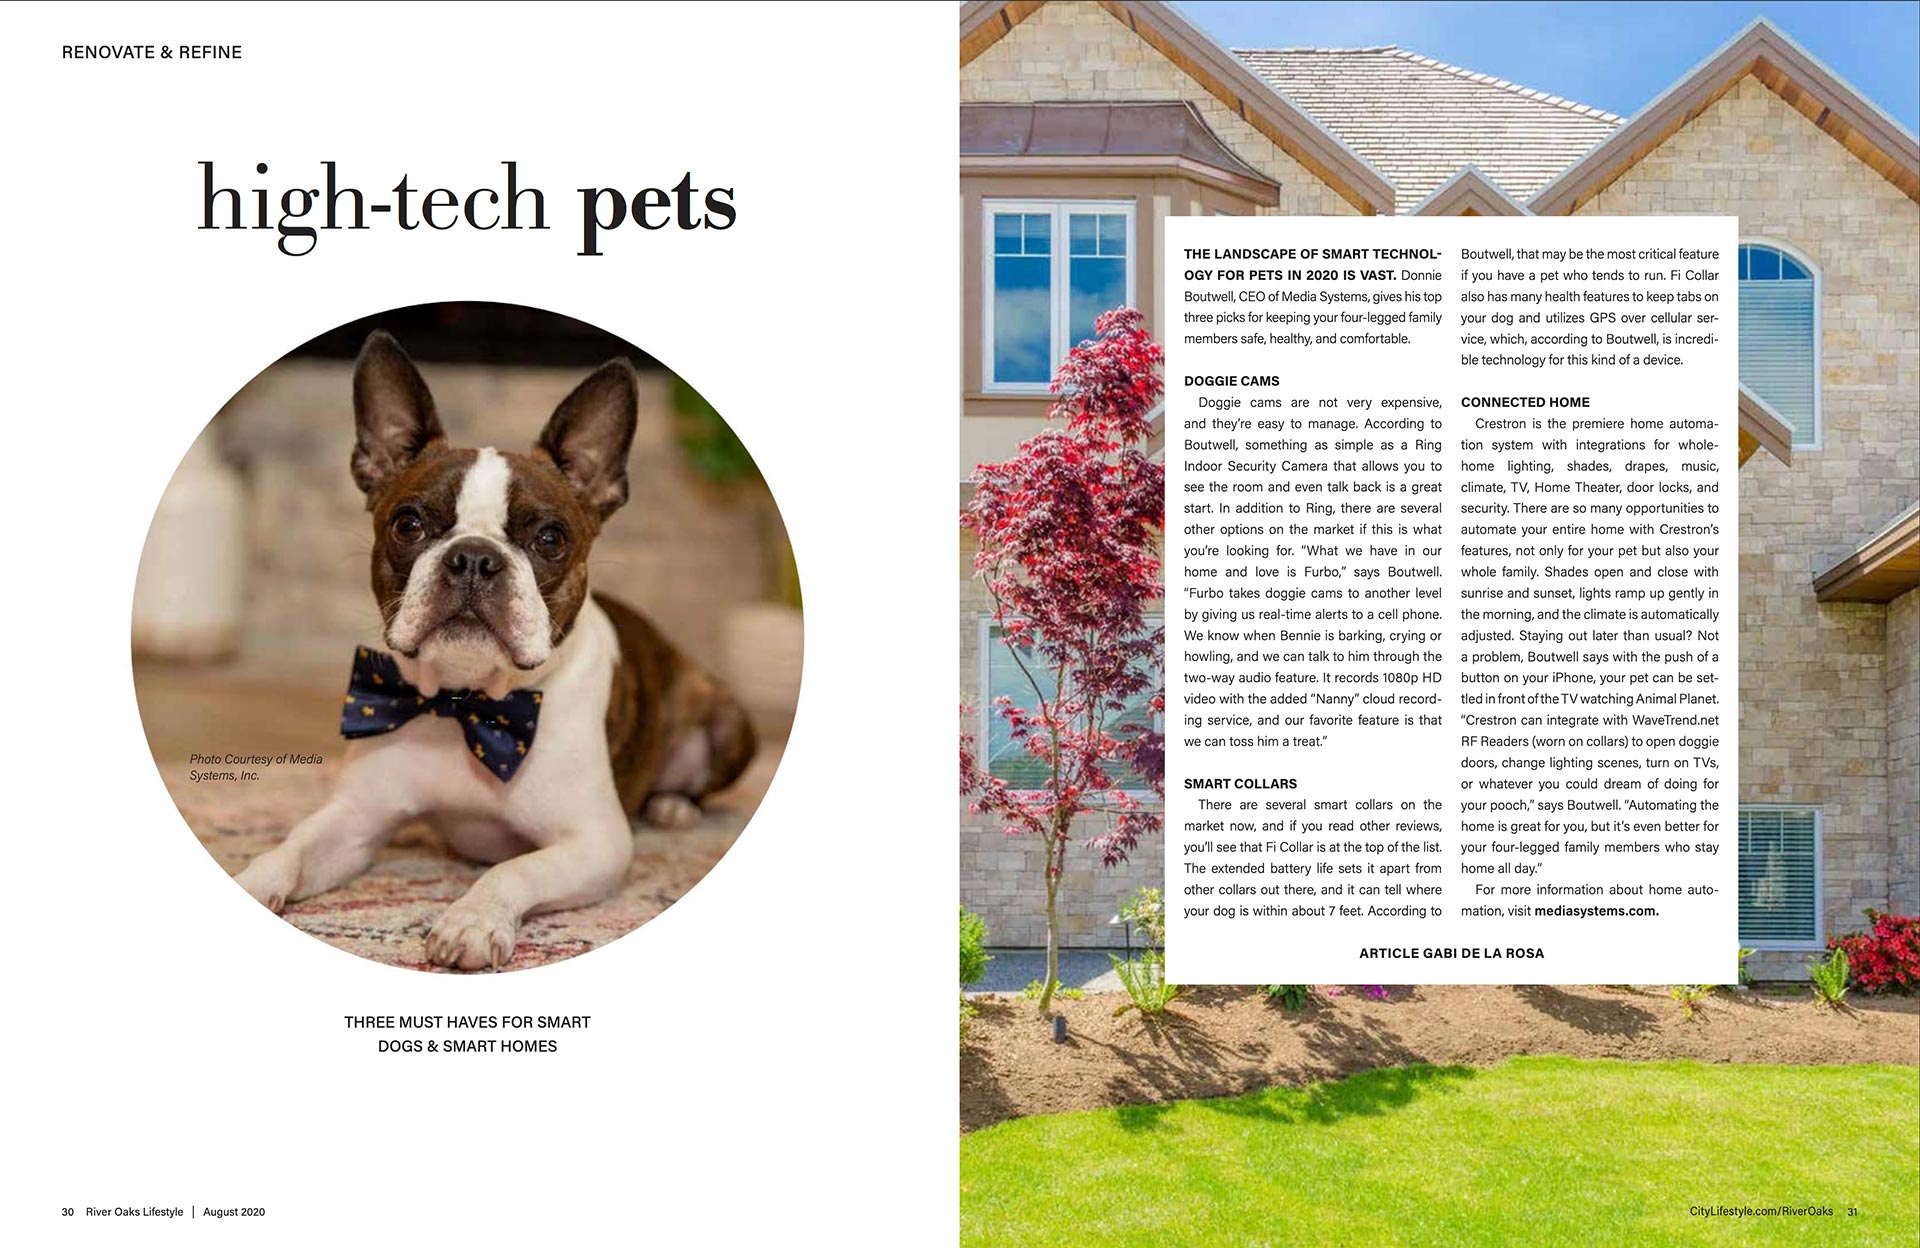 Image or Screenshot of High-Tech Pets: Three Must Haves for Smart Dogs & Smart Homes